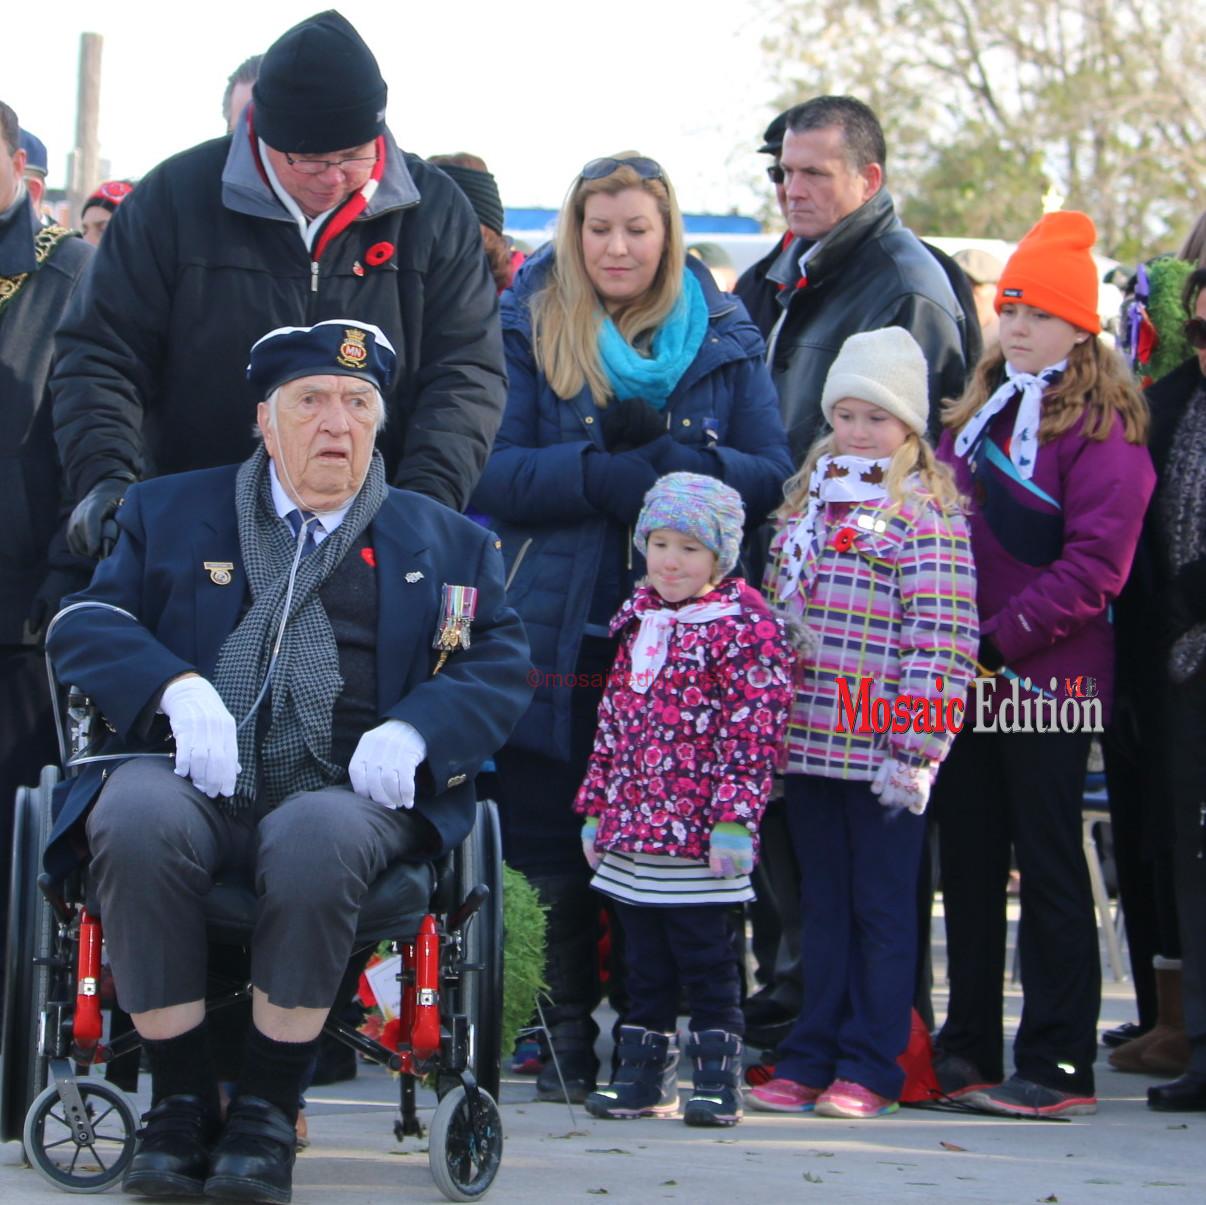 Clint Page, 93, a World War 11 veteran of the Merchant Navy was at the event and watched as his grandchildren laid the wreaths in memory of the fallen heroes.